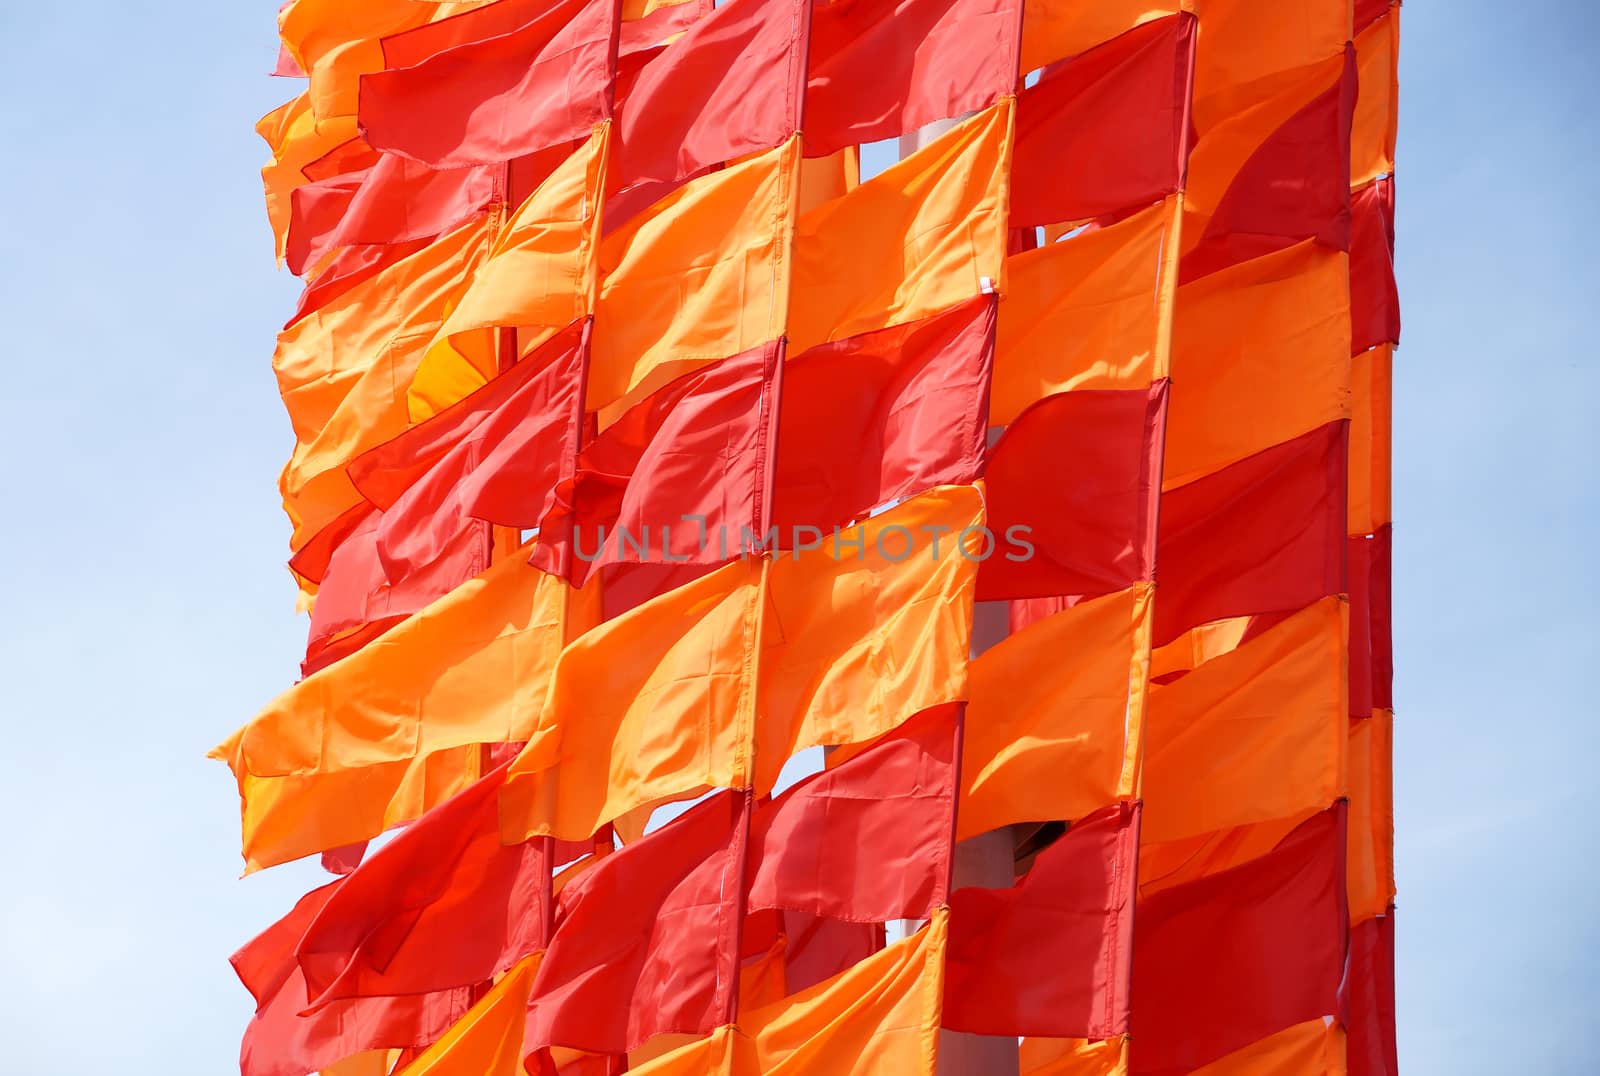 Festive flags of red and orange color by Vadimdem